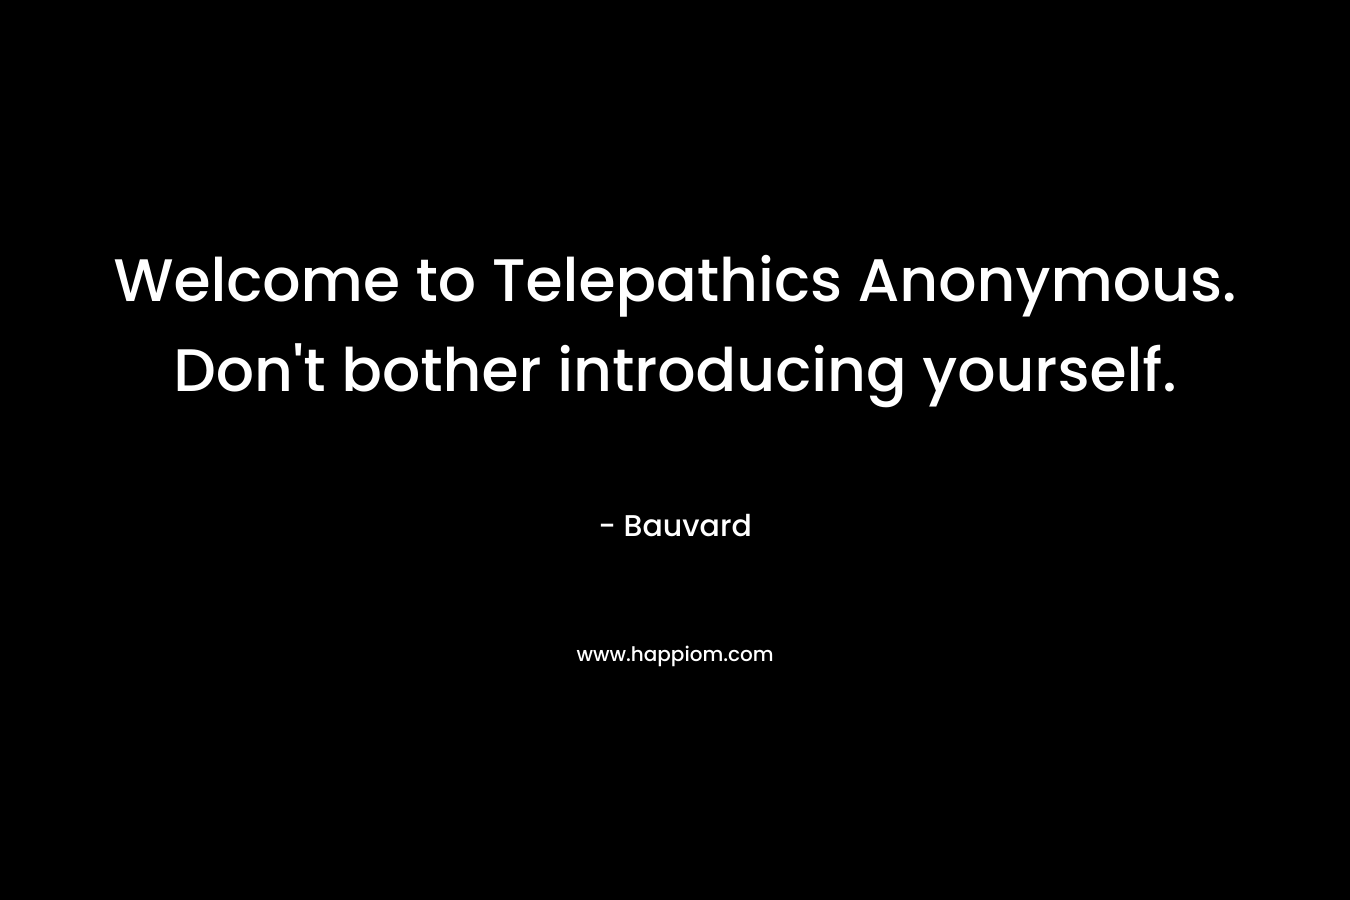 Welcome to Telepathics Anonymous. Don't bother introducing yourself.